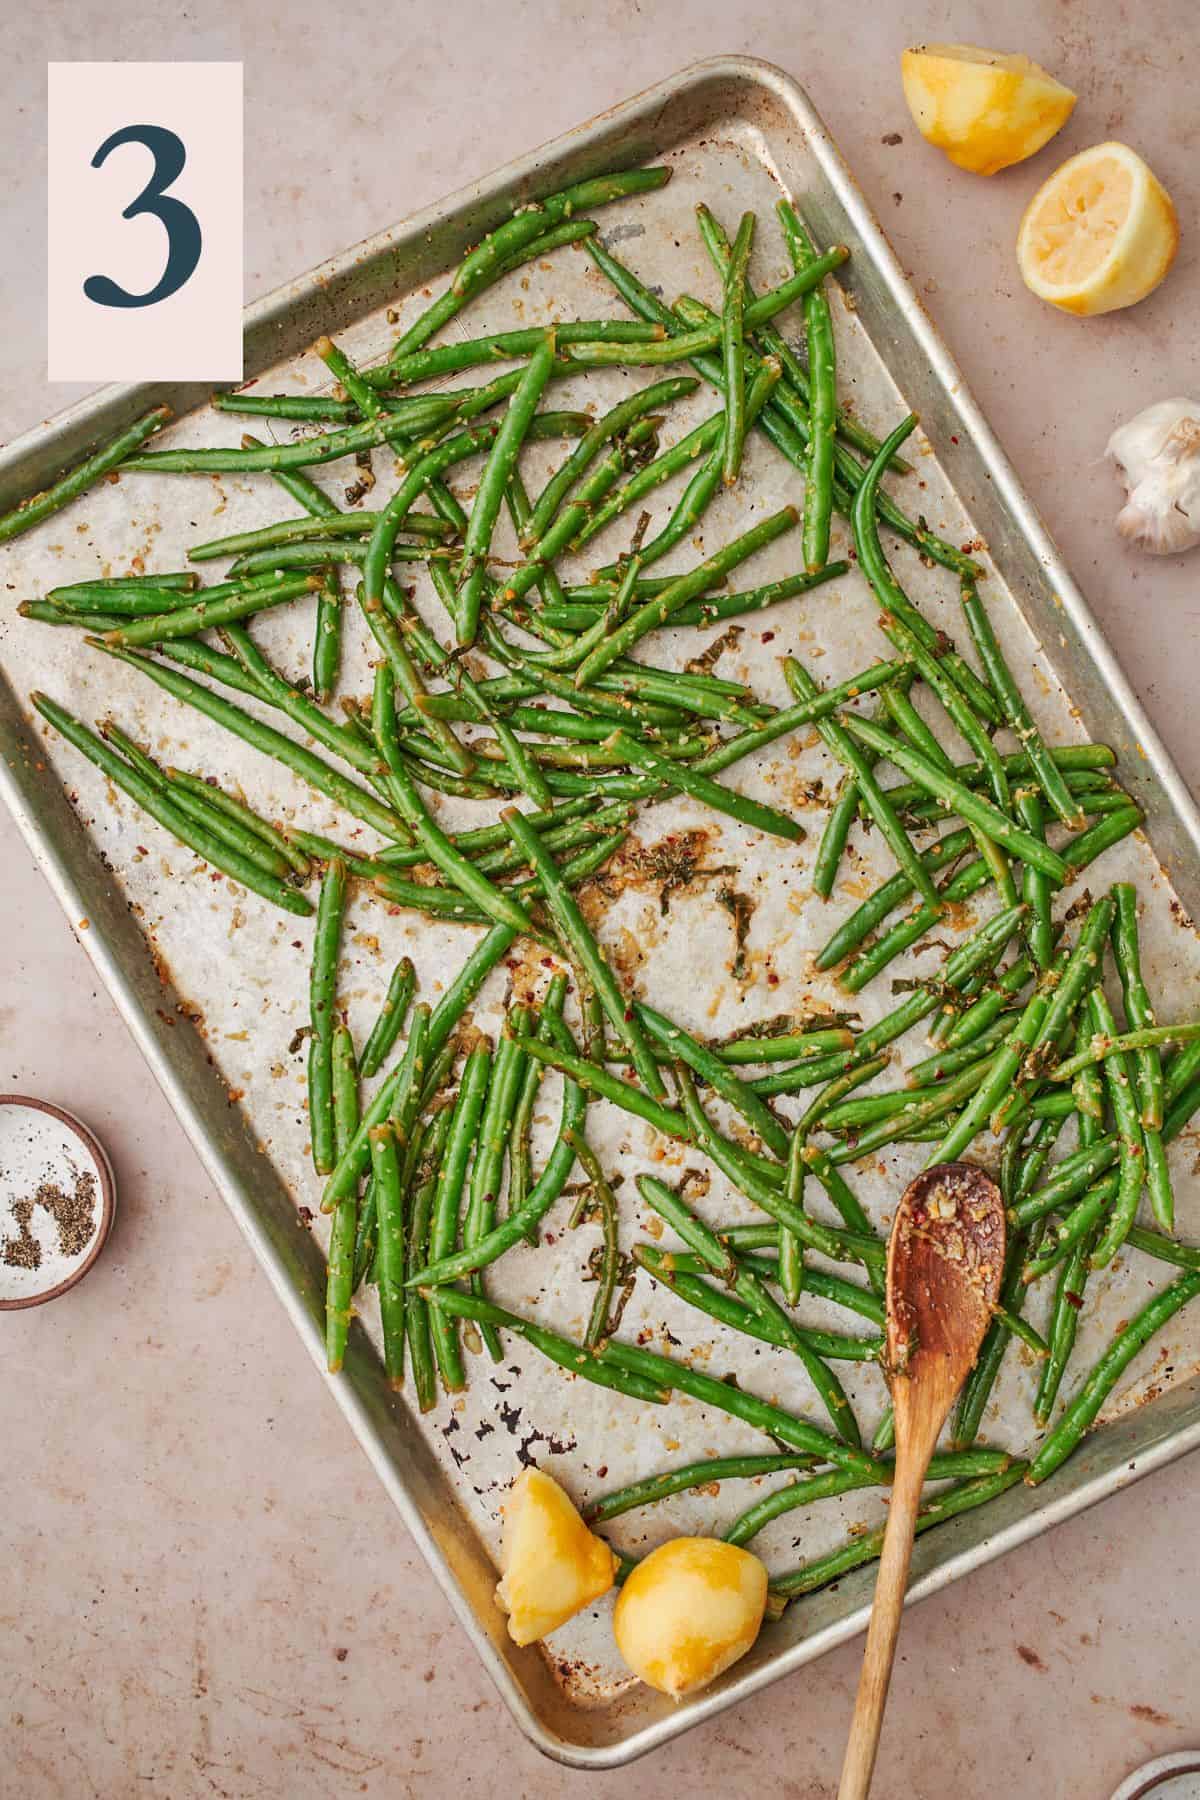 Roasted green beans topped with more lemon juice and basil.